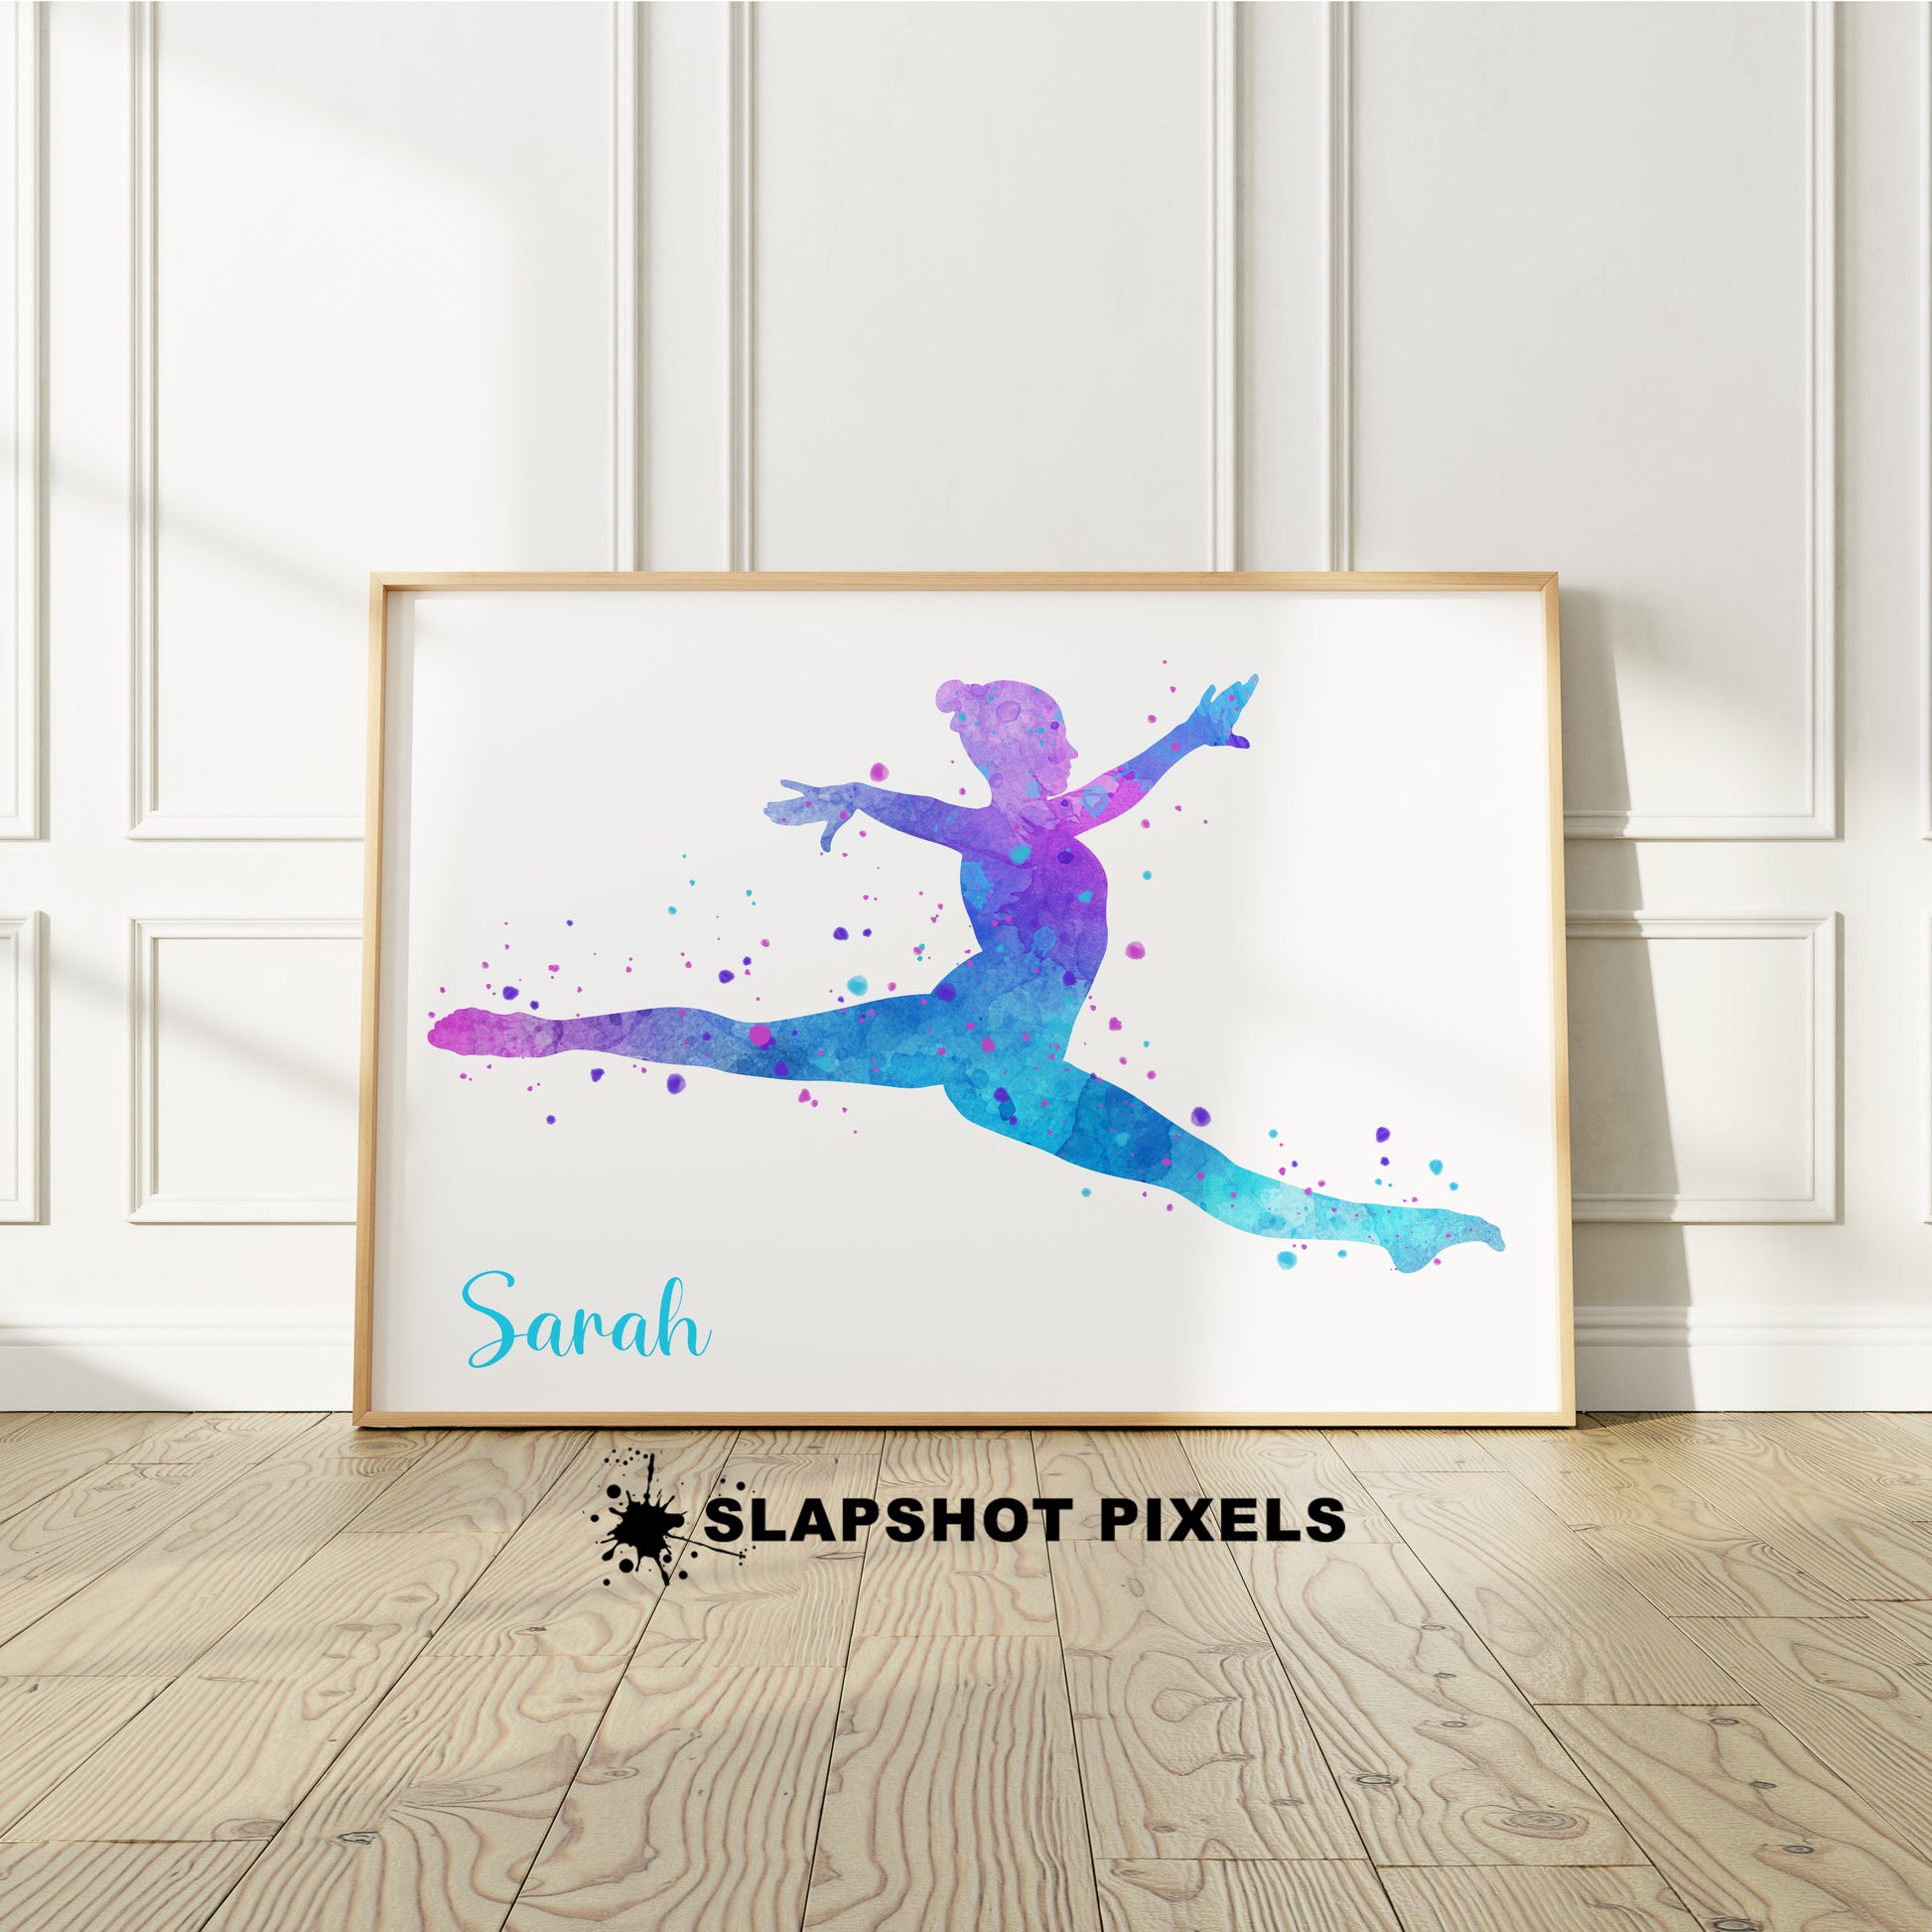 Personalized gymnastics poster showing girl mid jump with custom name under her. Designed in pink, purple and teal watercolor splatters. Perfect gymnastics gifts for girls, gymnastics prints, dance wall art décor in a girls bedroom and birthday gifts for girls.